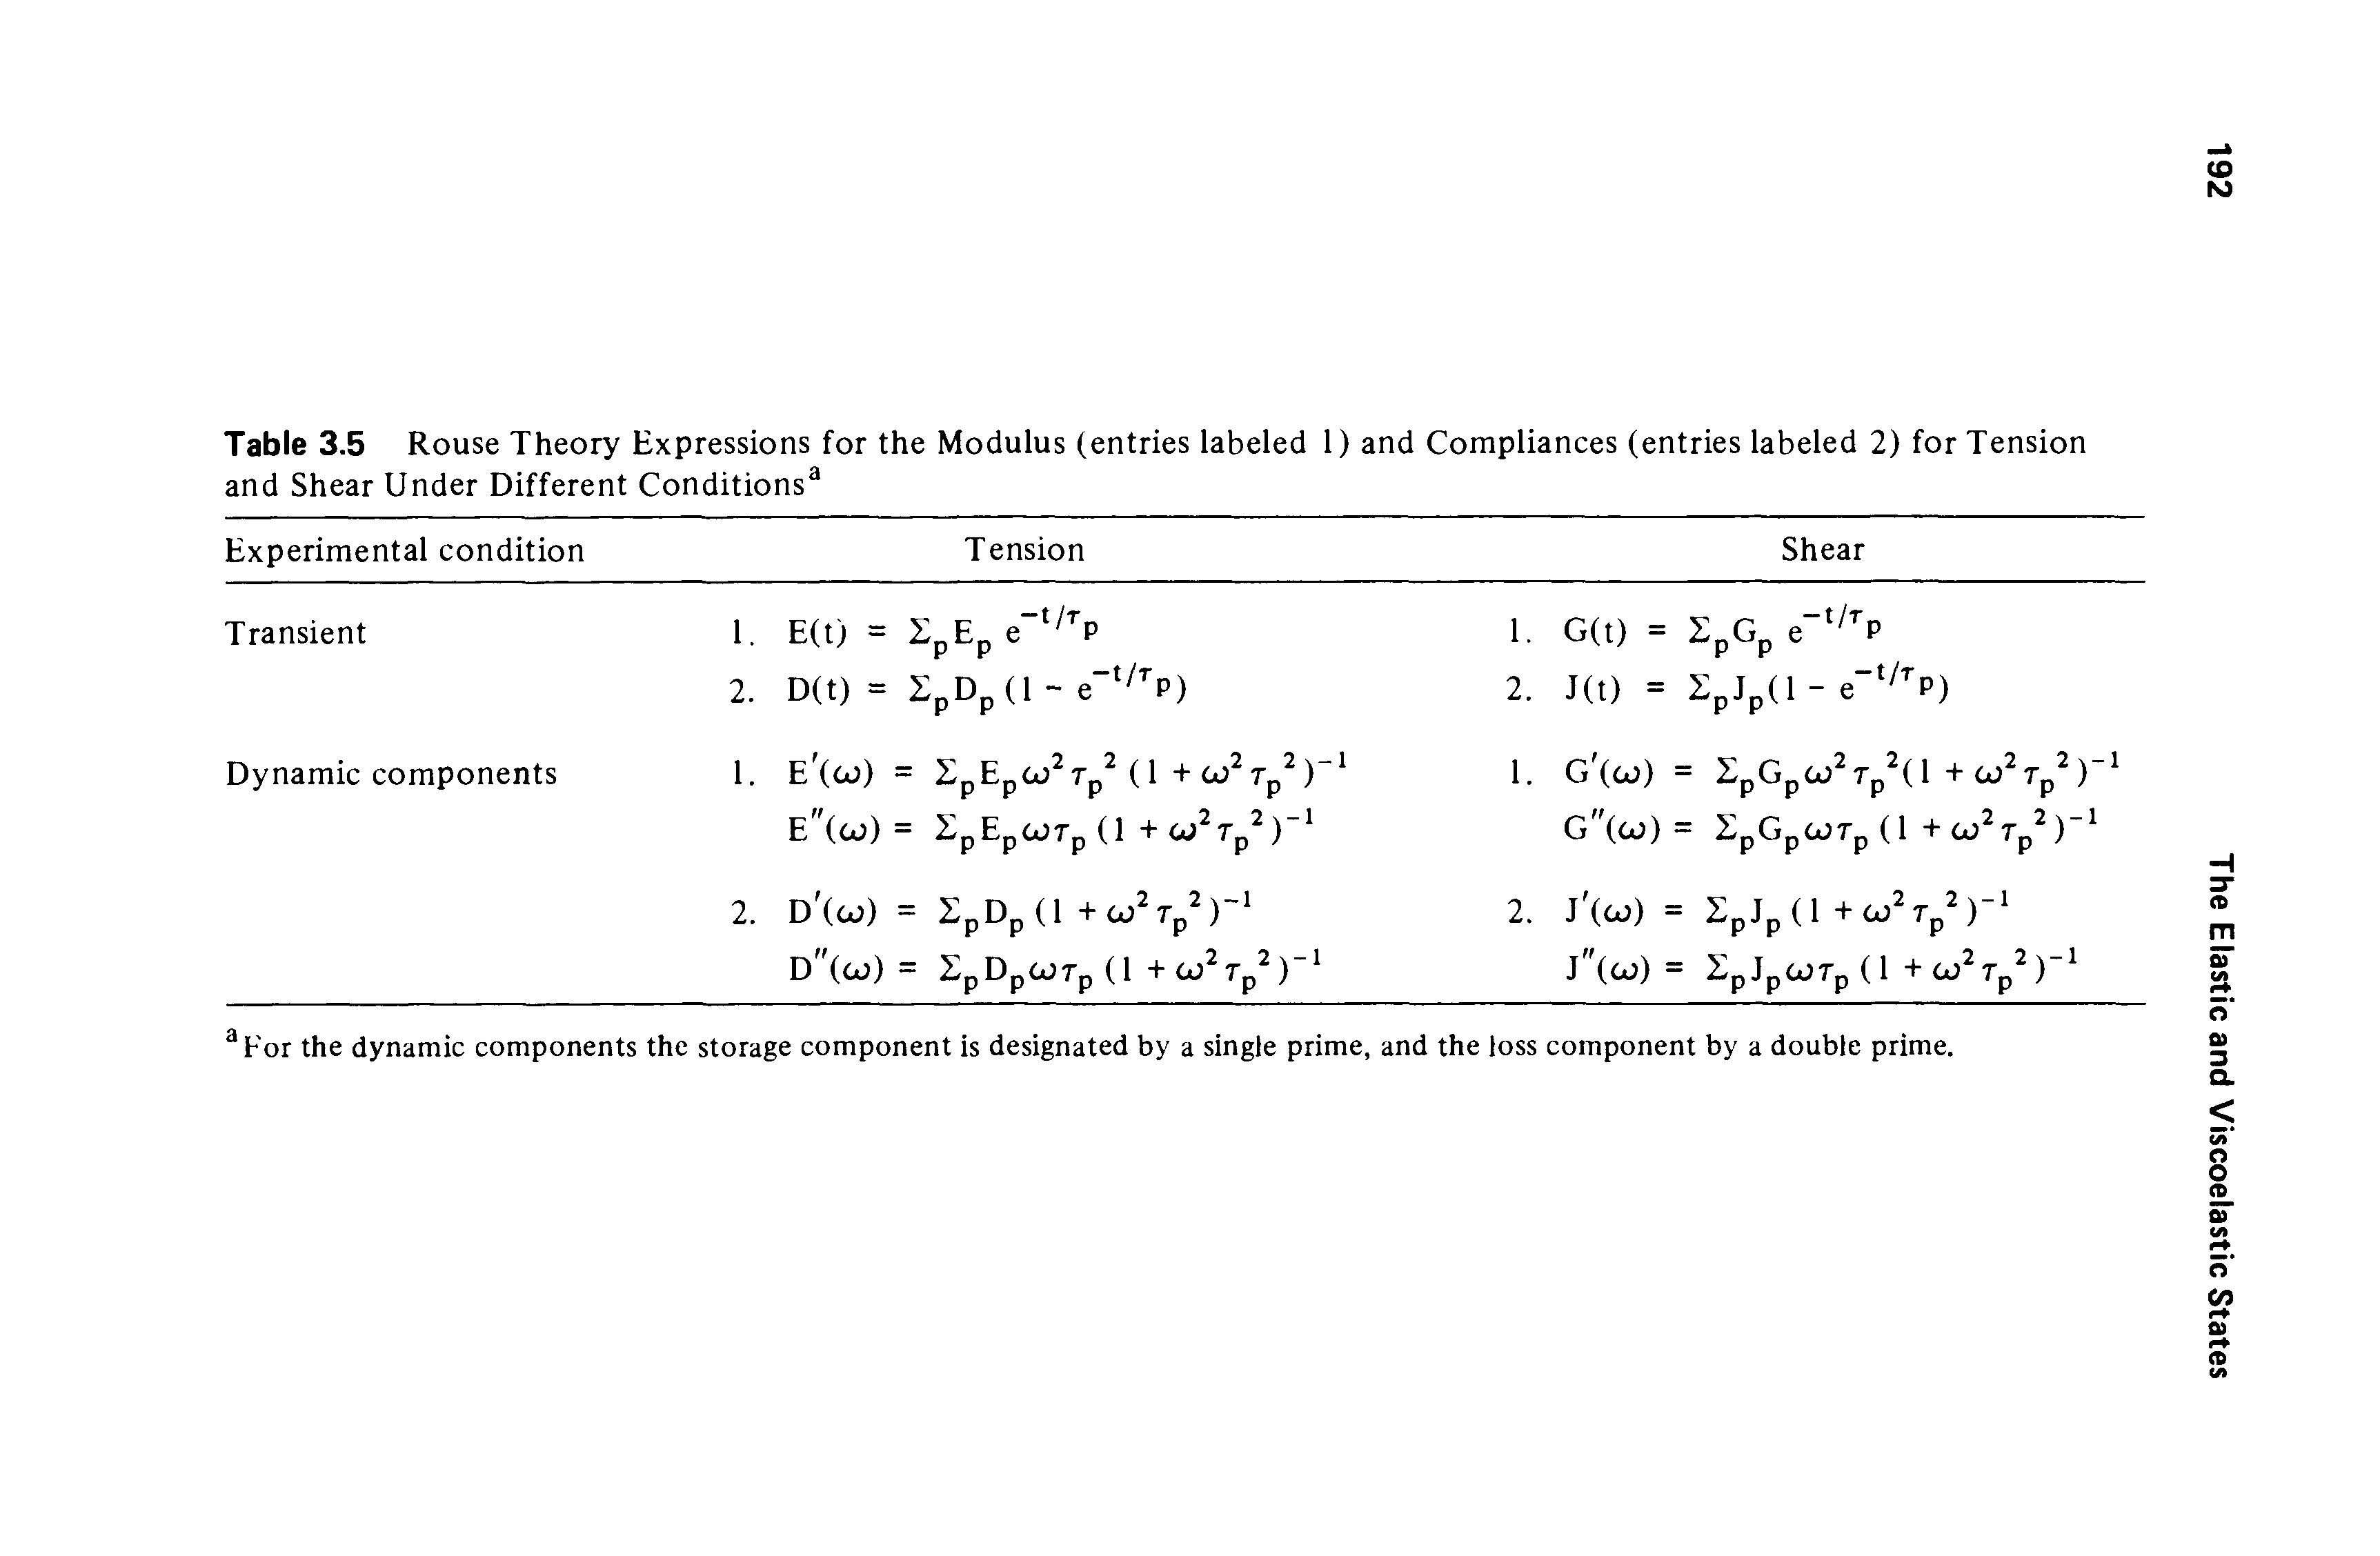 Table 3.5 Rouse Theory Expressions for the Modulus (entries labeled 1) and Compliances (entries labeled 2) for Tension and Shear Under Different Conditions ...